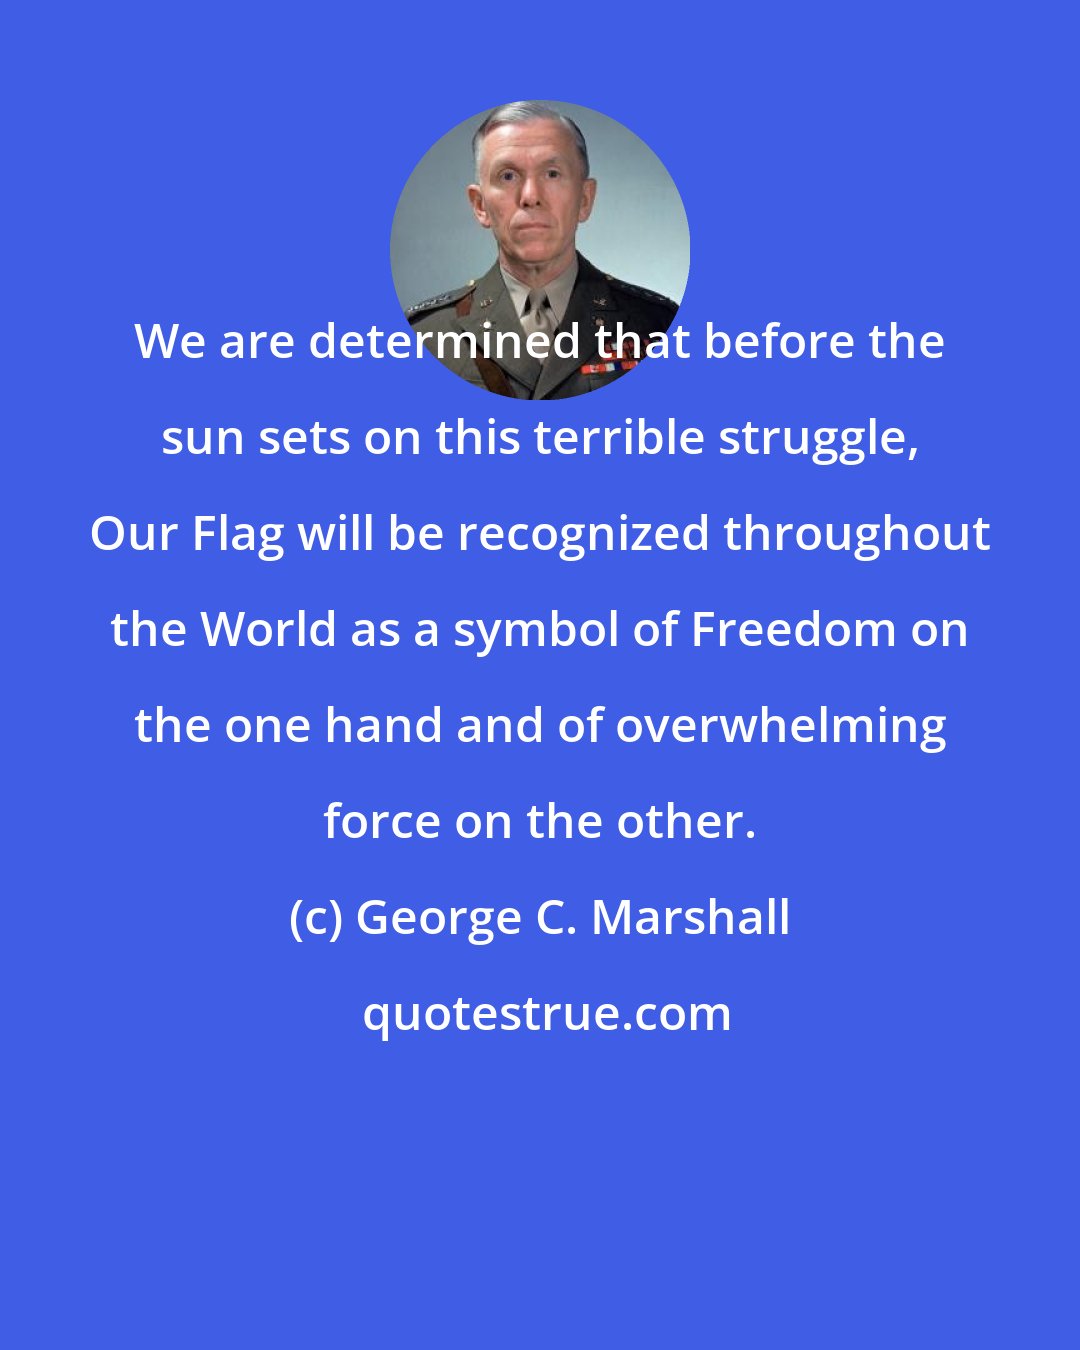 George C. Marshall: We are determined that before the sun sets on this terrible struggle, Our Flag will be recognized throughout the World as a symbol of Freedom on the one hand and of overwhelming force on the other.